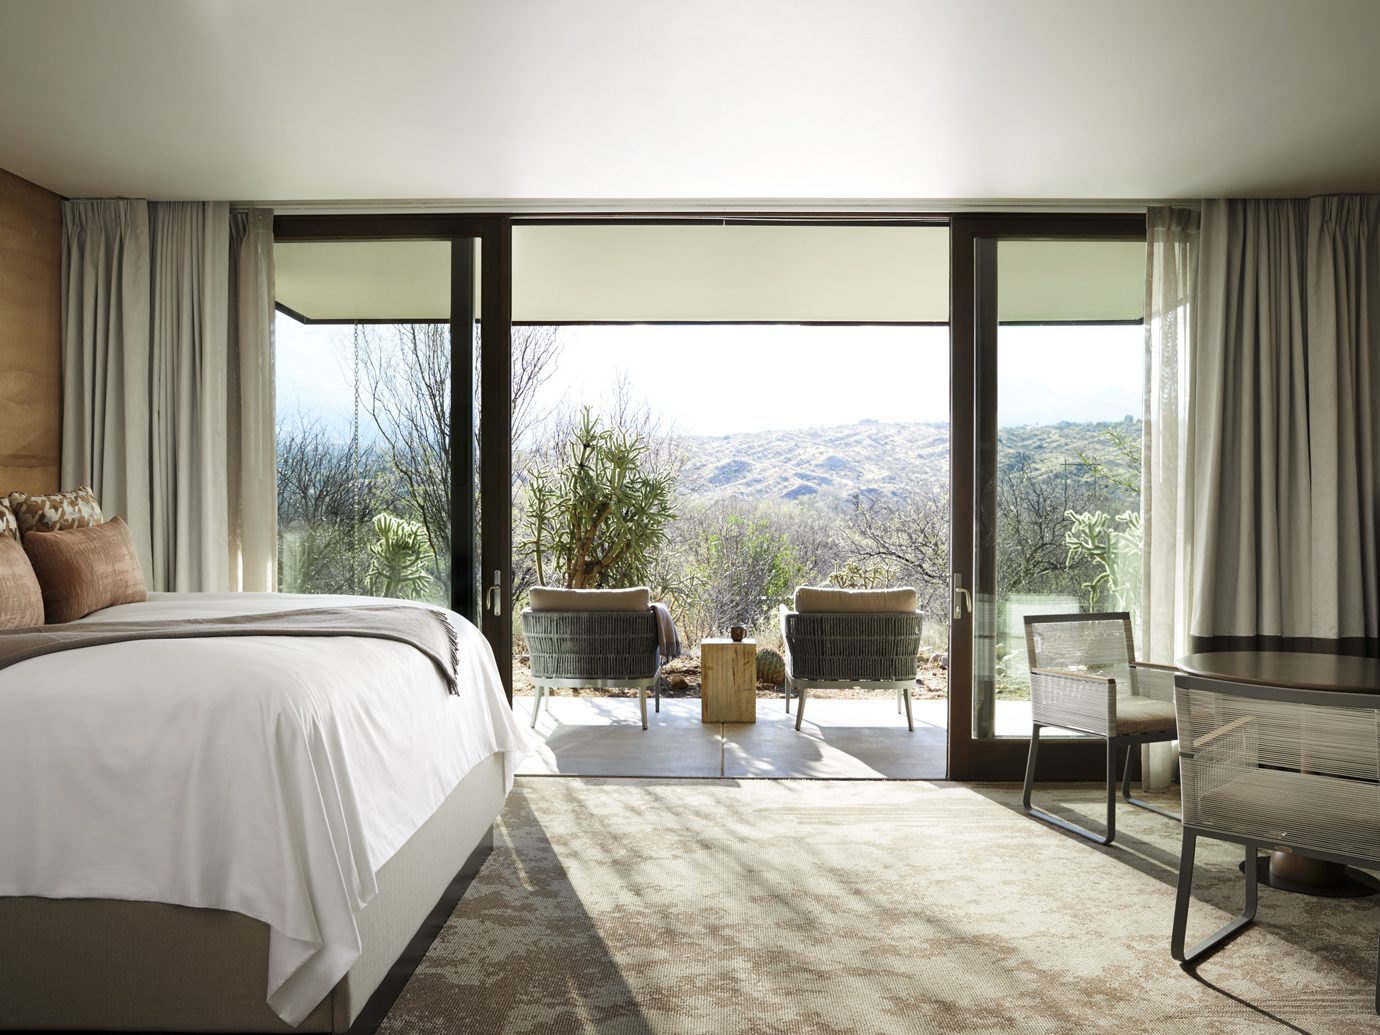 guestroom and patio at Miraval Resort and Spa, Tucson, AZ